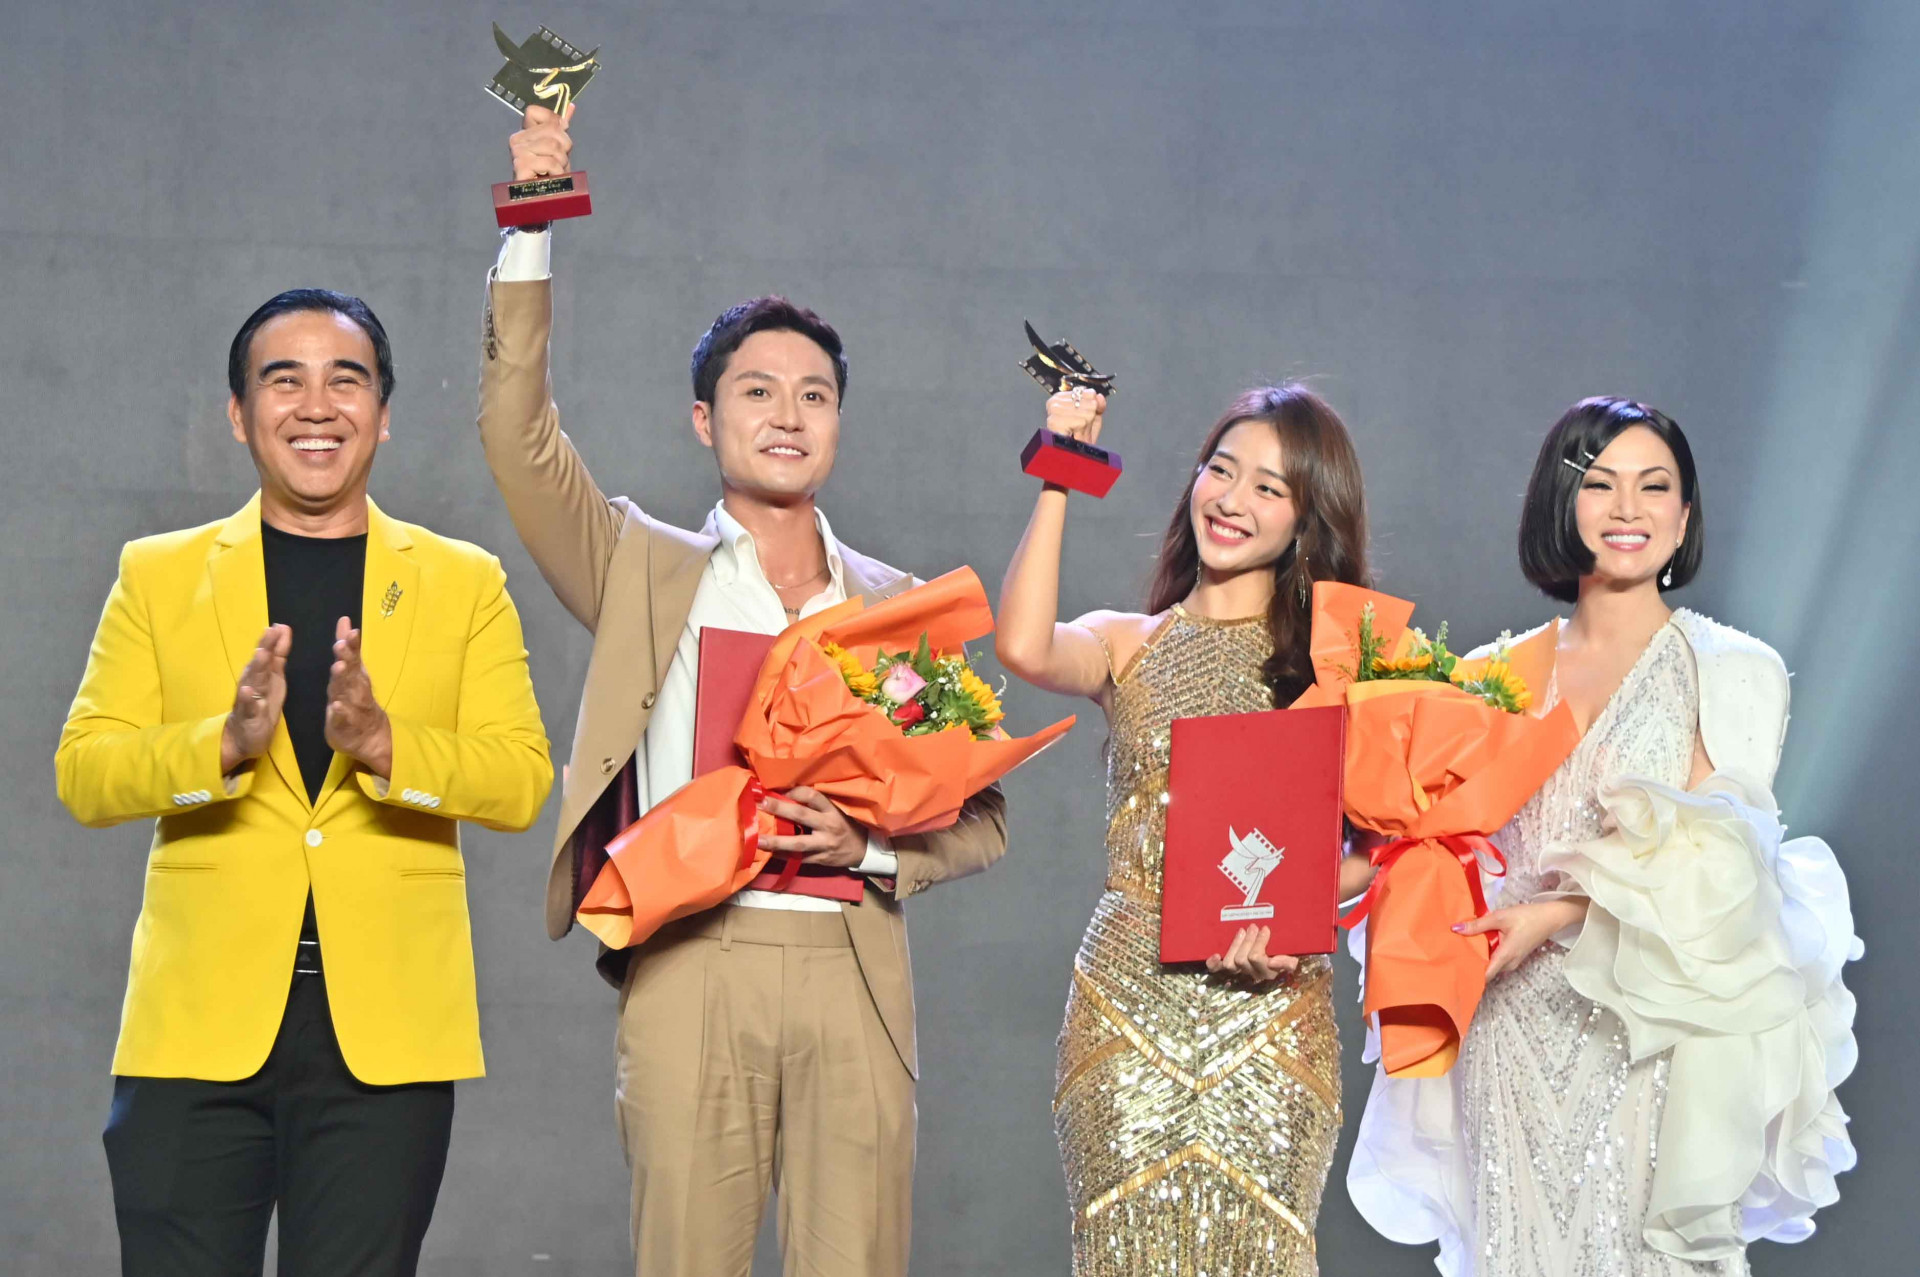 Actors Thanh Son and Kha Ngan win prizes of best male and female leads in TV drama series category